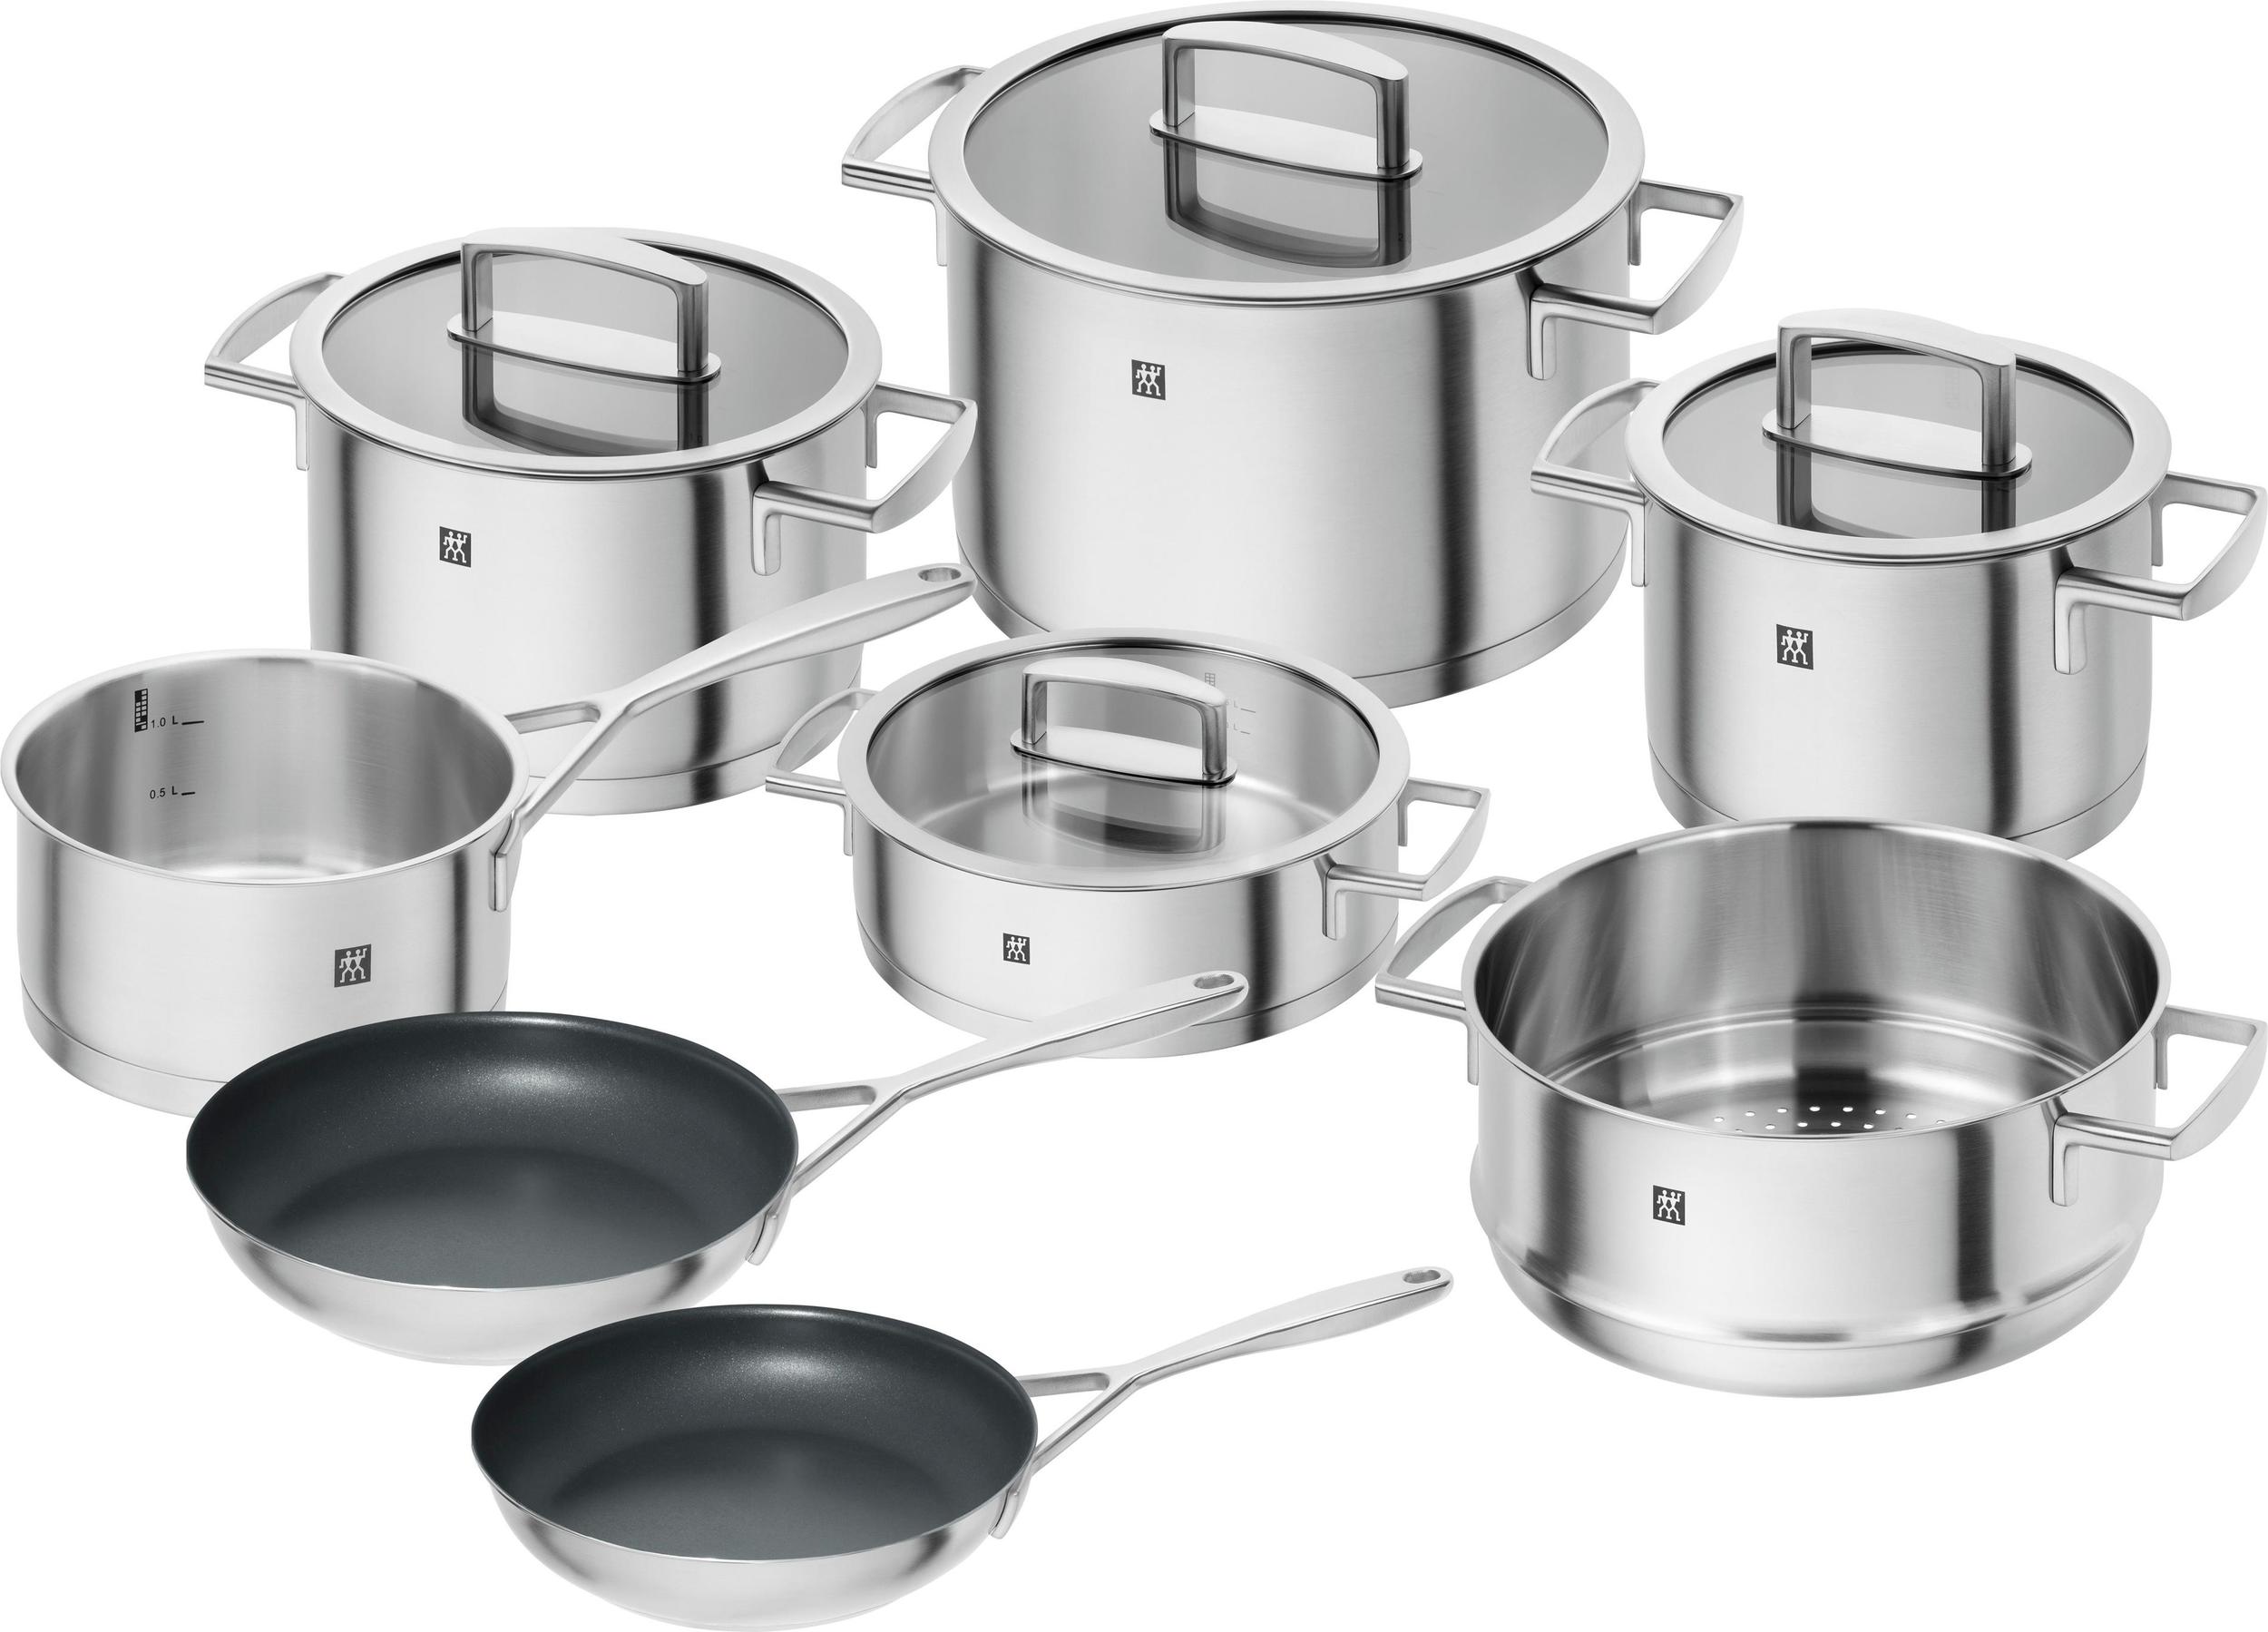 ZWILLING - Pots & Pans and Cookware Sets